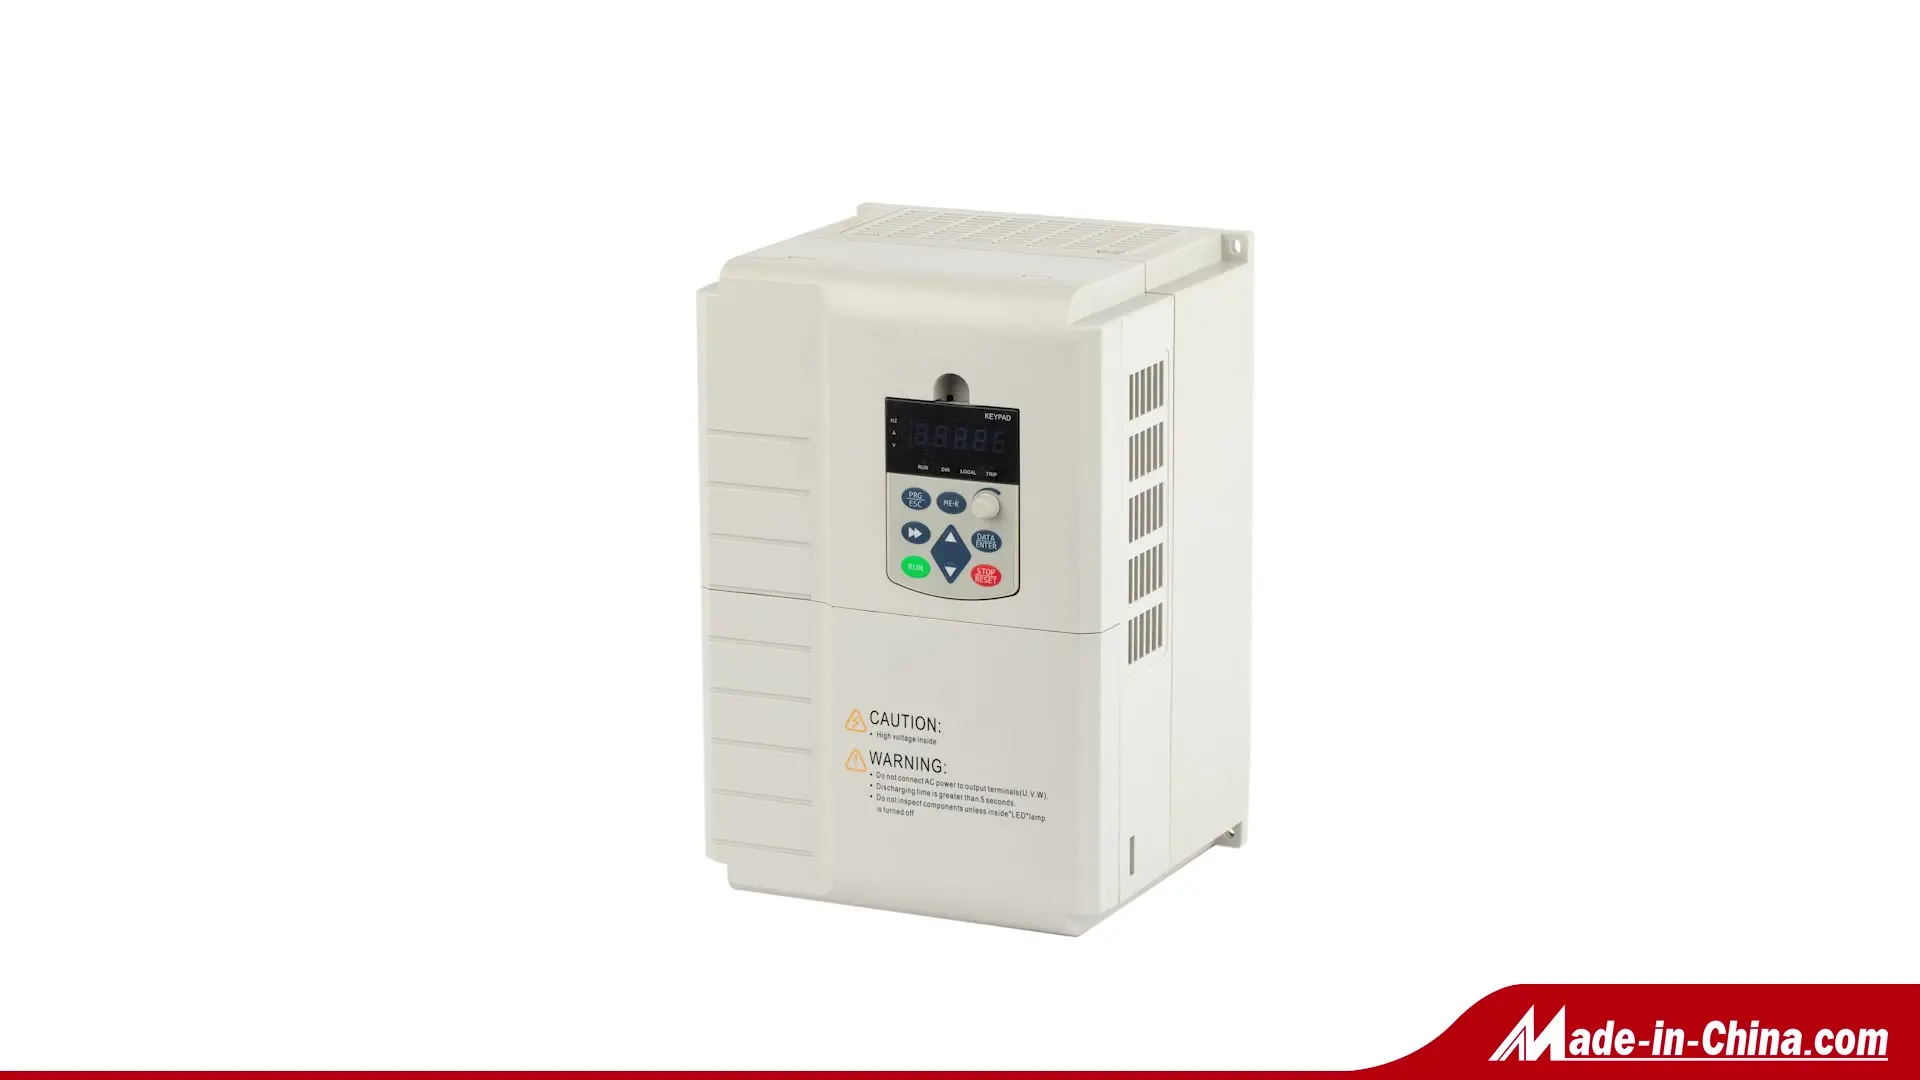 

Factory Price Single Phase To Three Phase 15KW VFD/Variable Frequency Drive/Frequency Inverter( Input 220V to 380V Output)